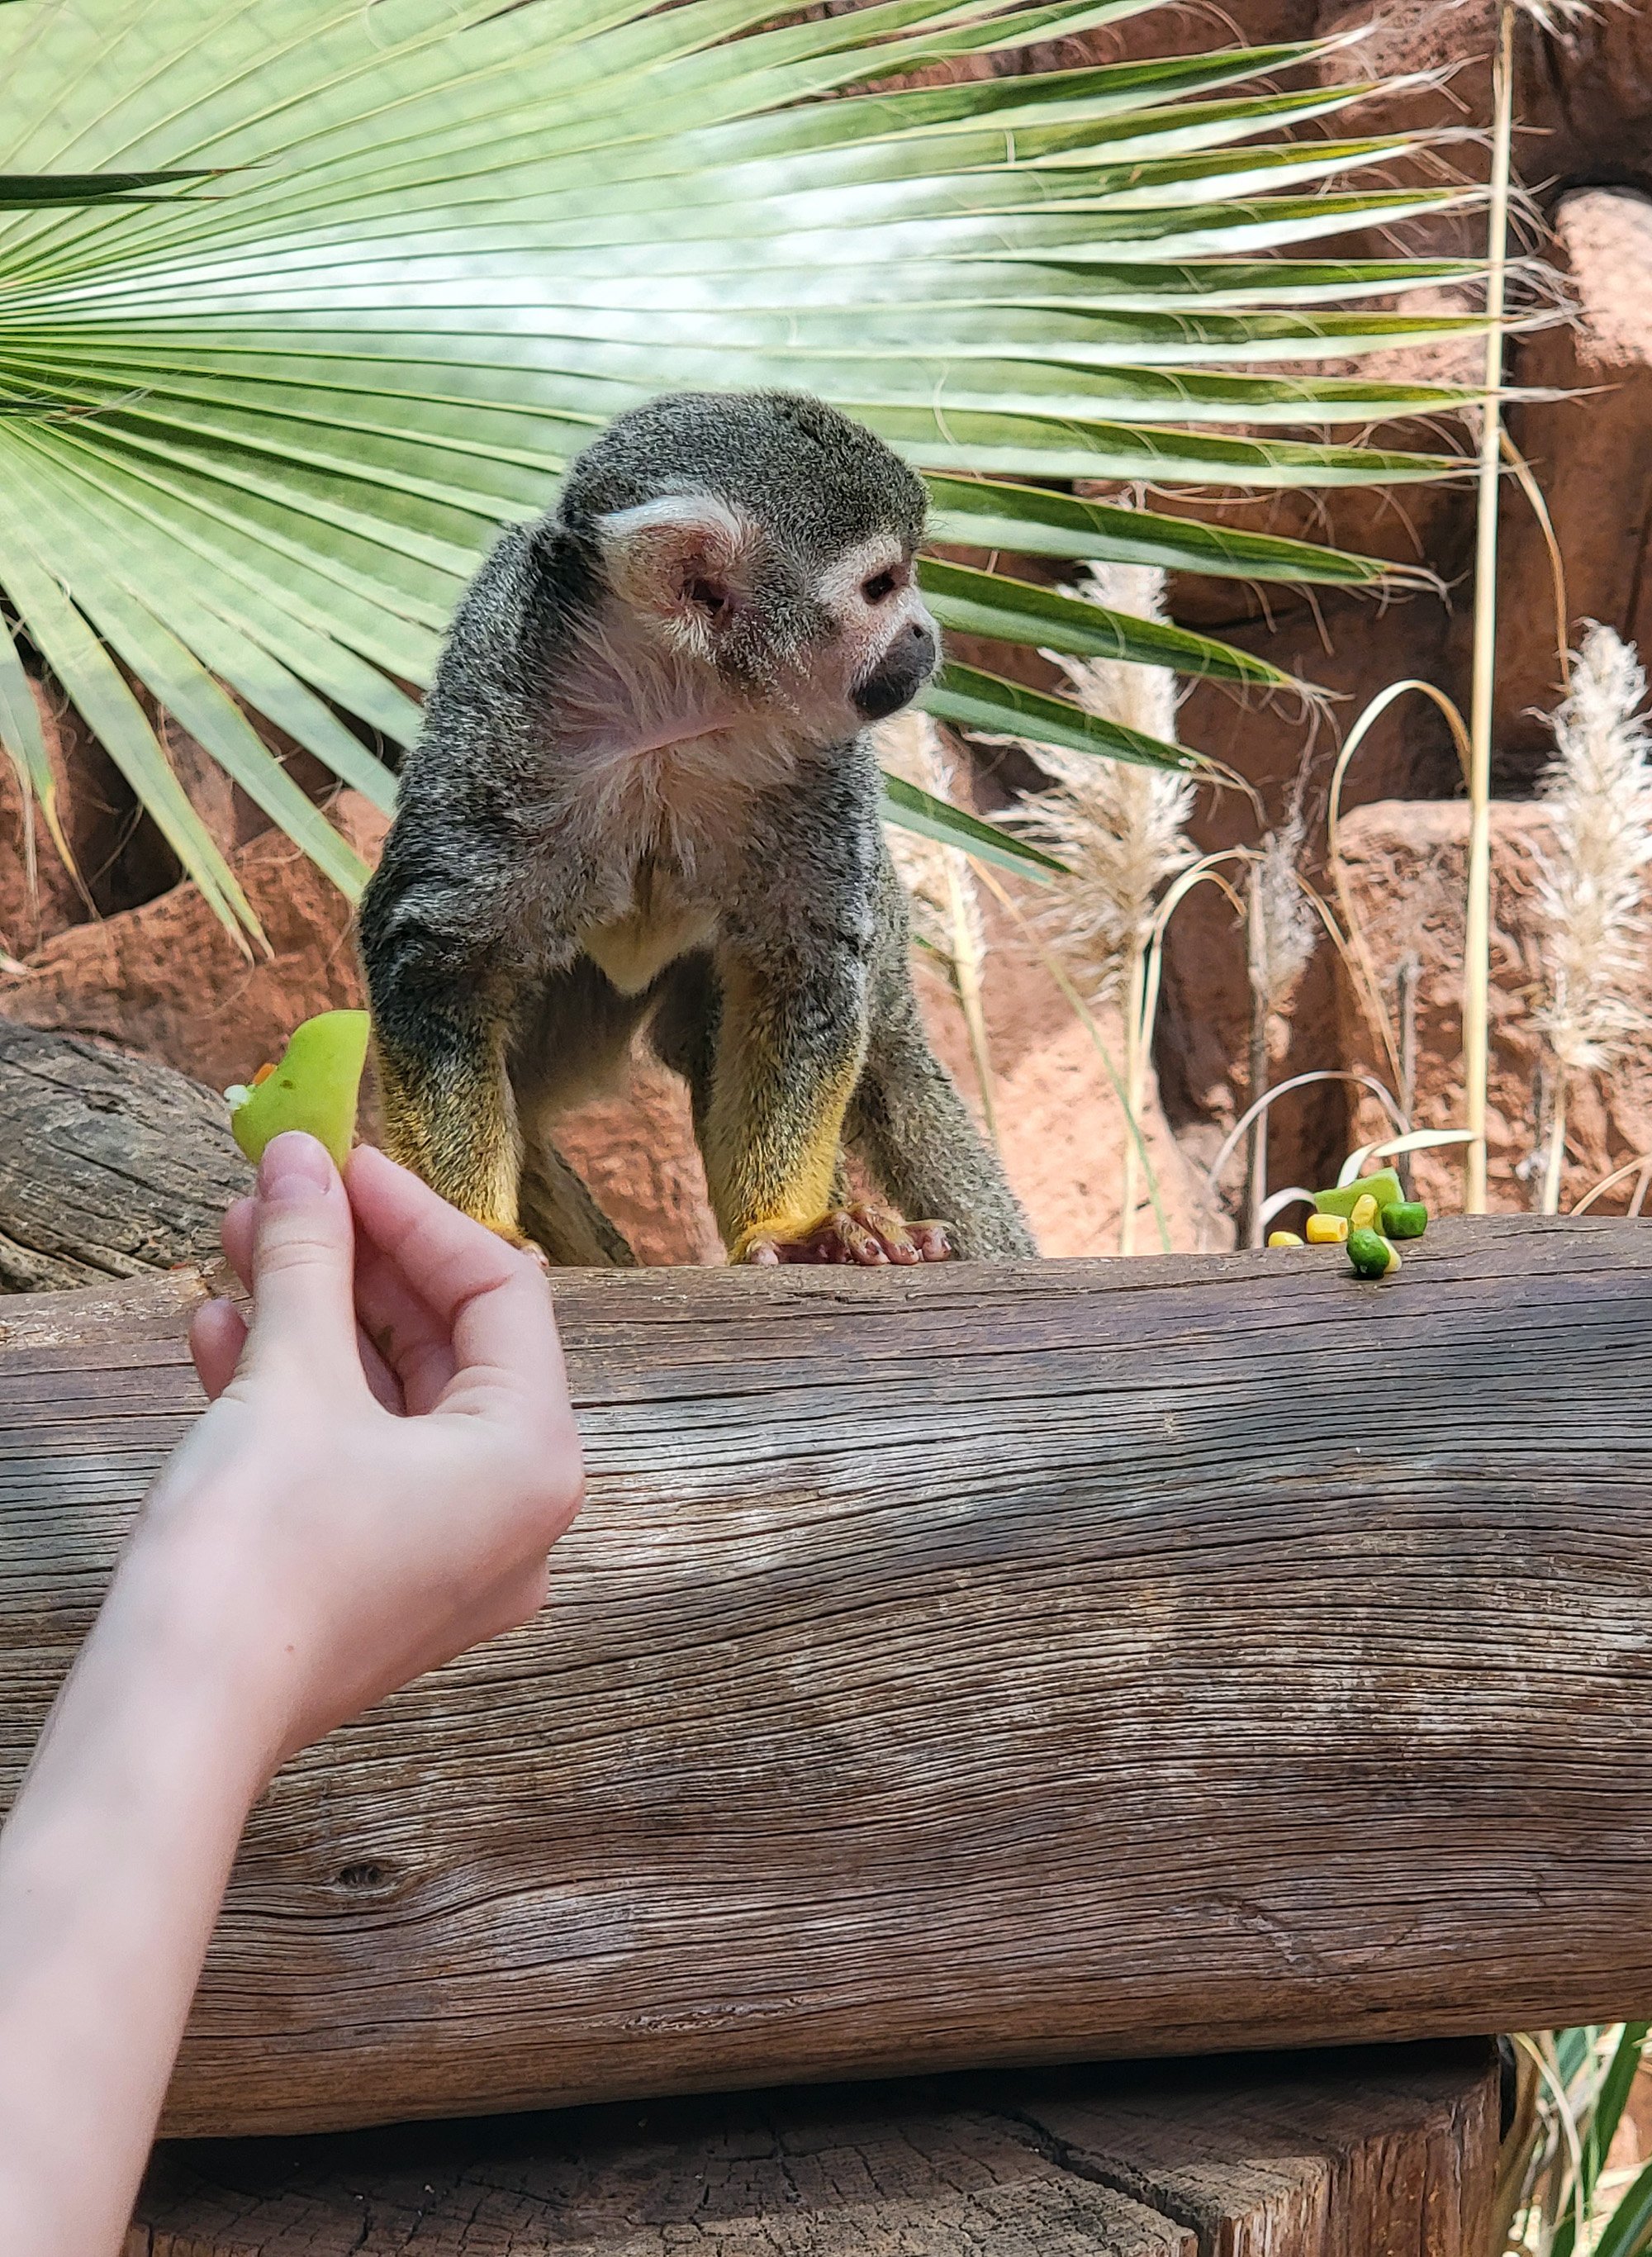 Then you get to the real monkeys. Most are behind glass but some you can feed.